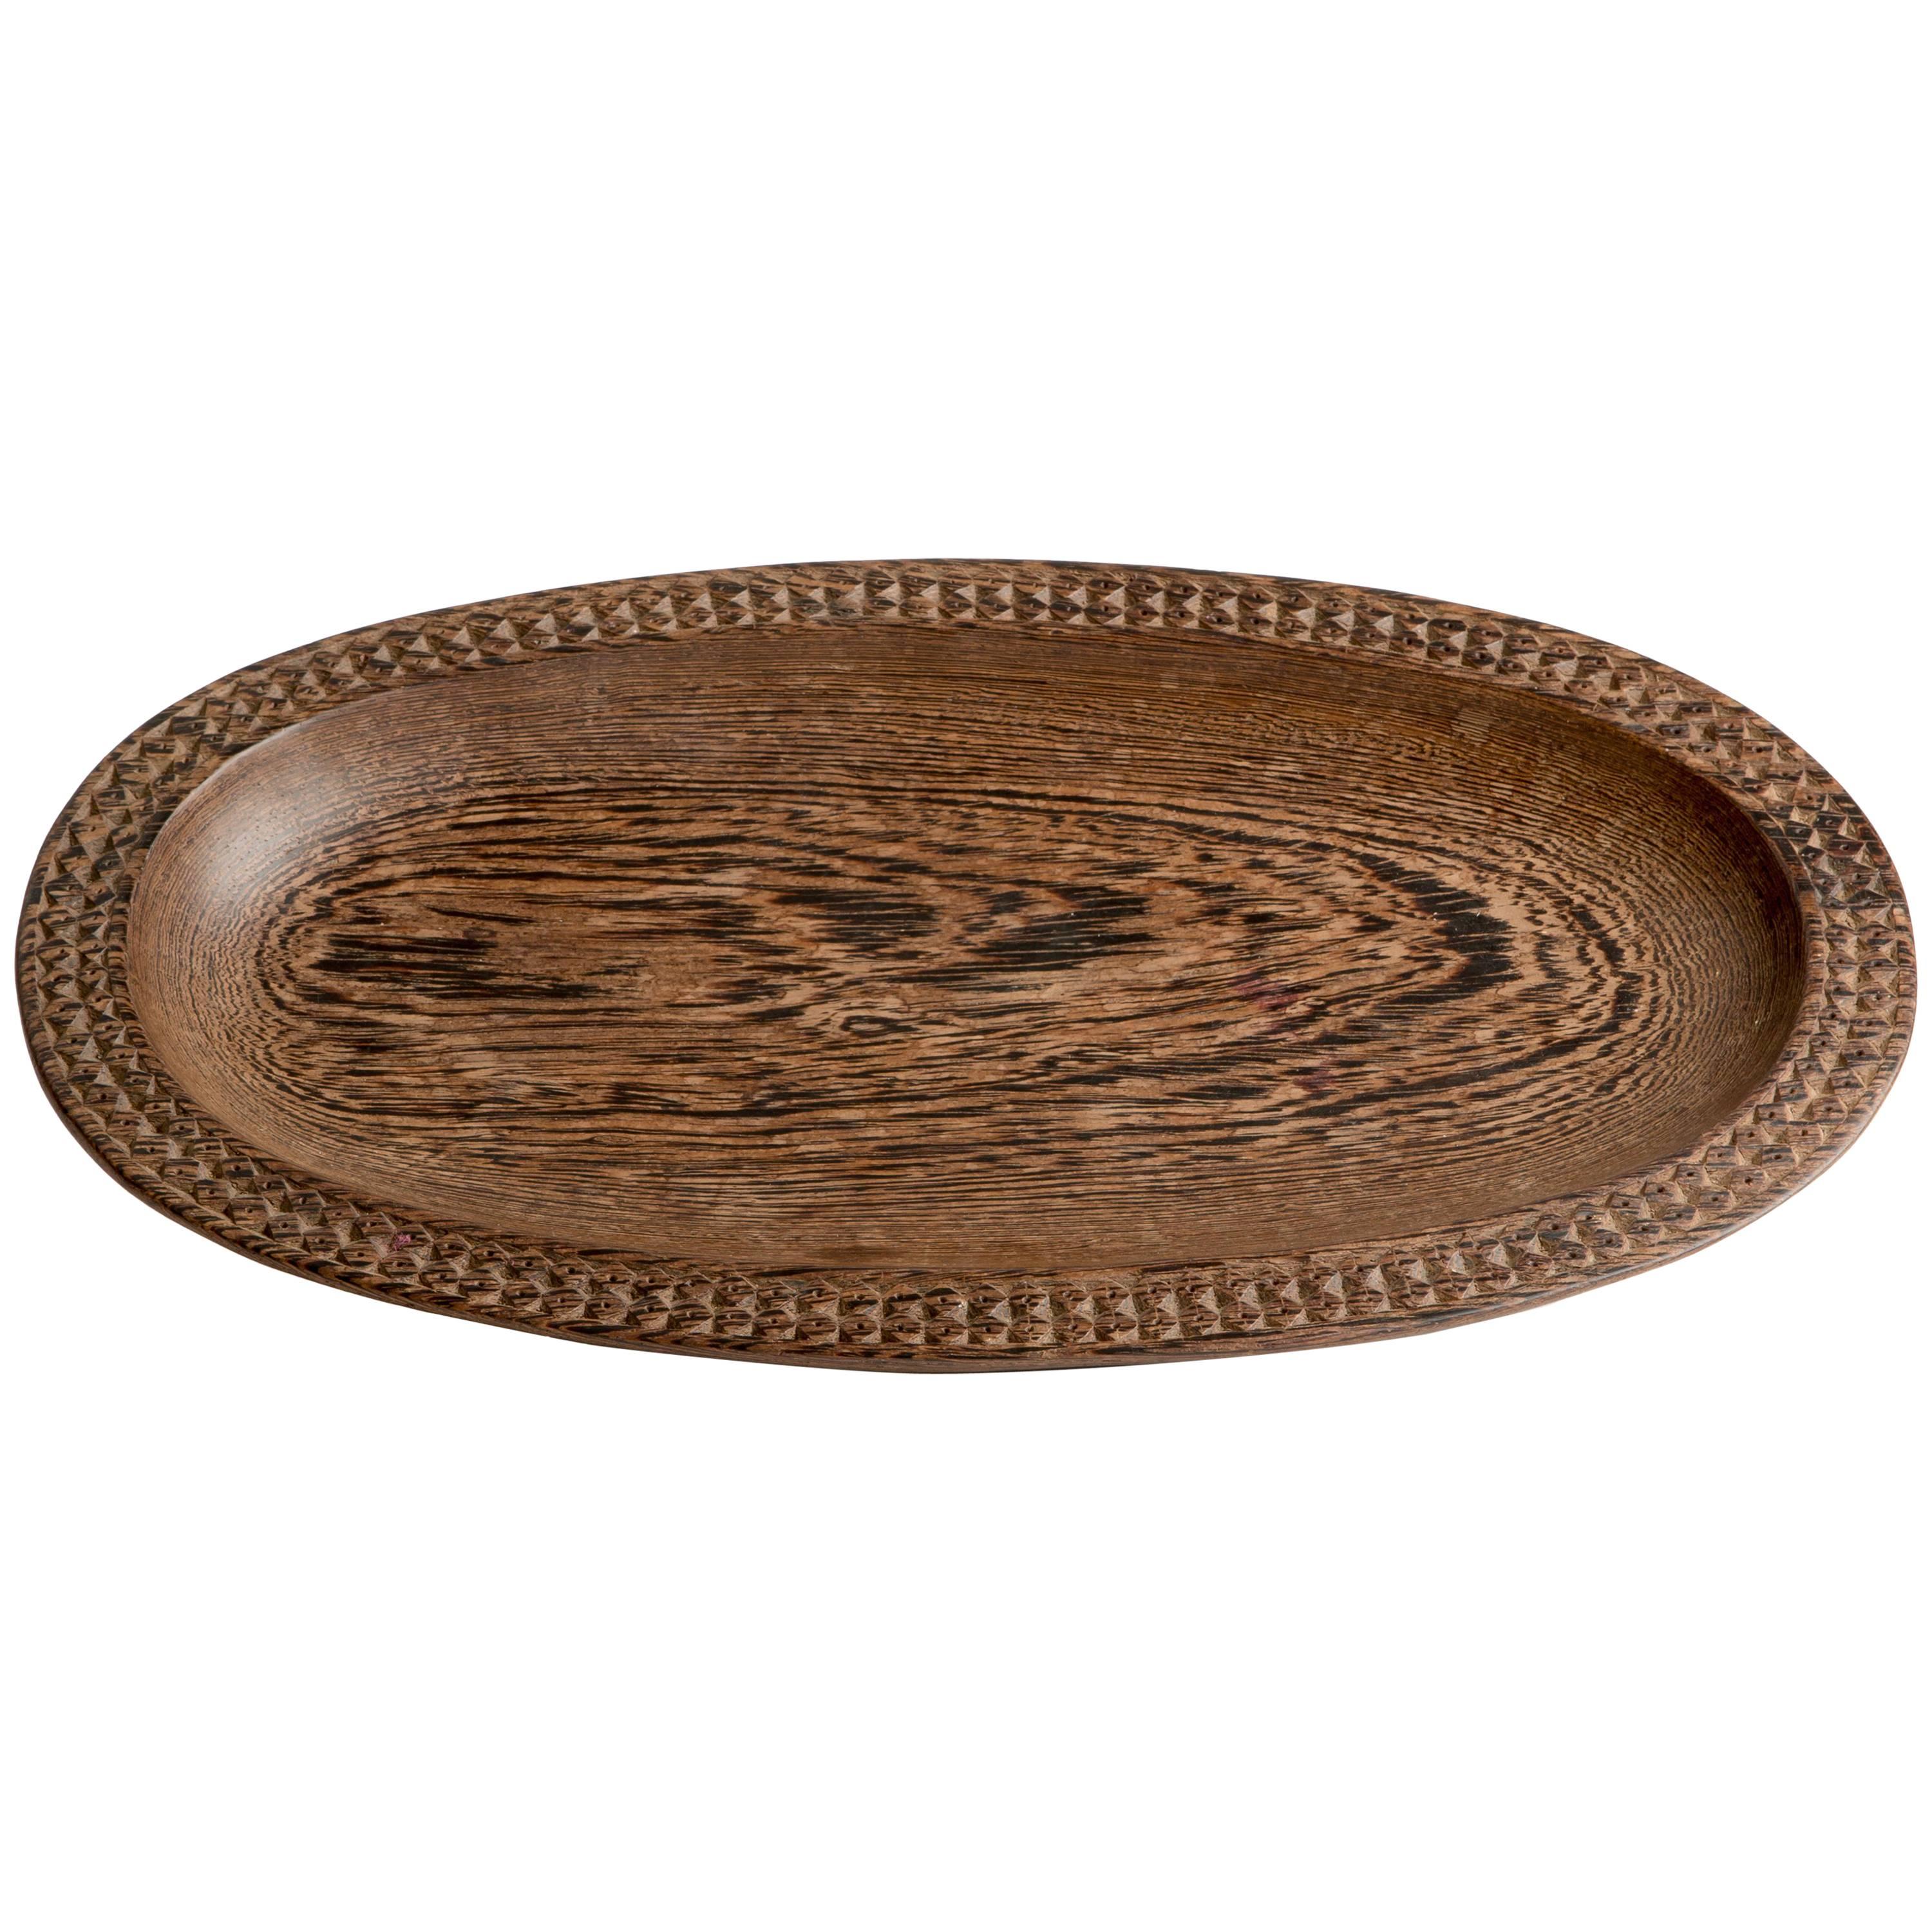 Carved Solid Wood Tray Made of Wenge For Sale